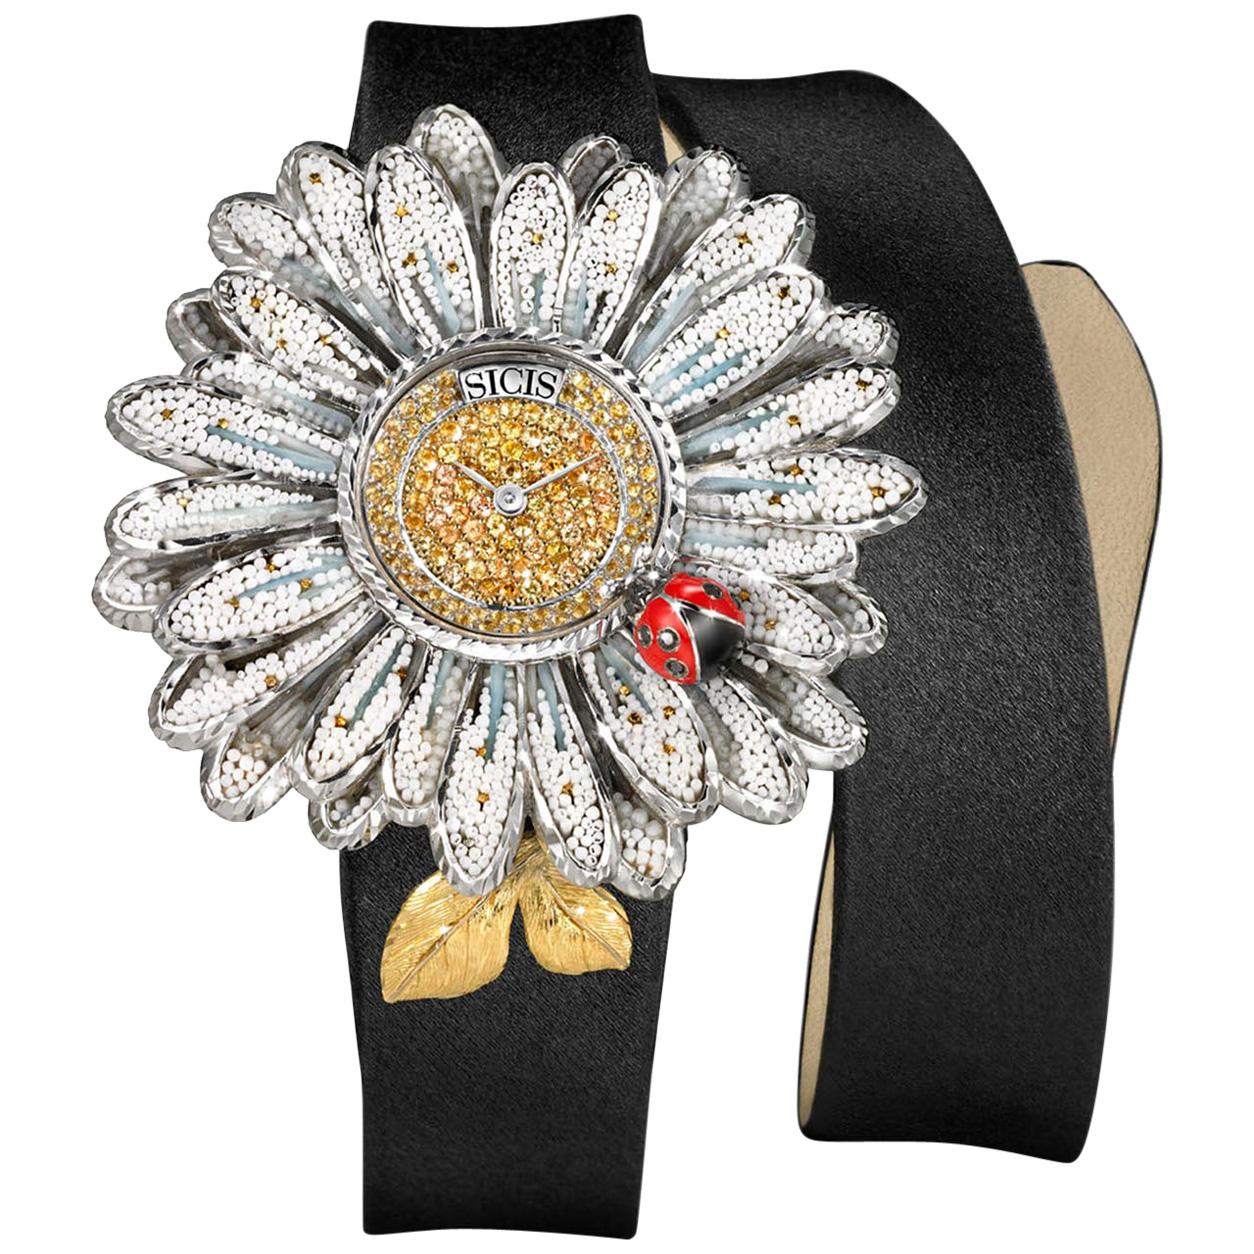 Watch White Gold Black Diamonds Sapphires Satin Strap Decorated with MicroMosaic